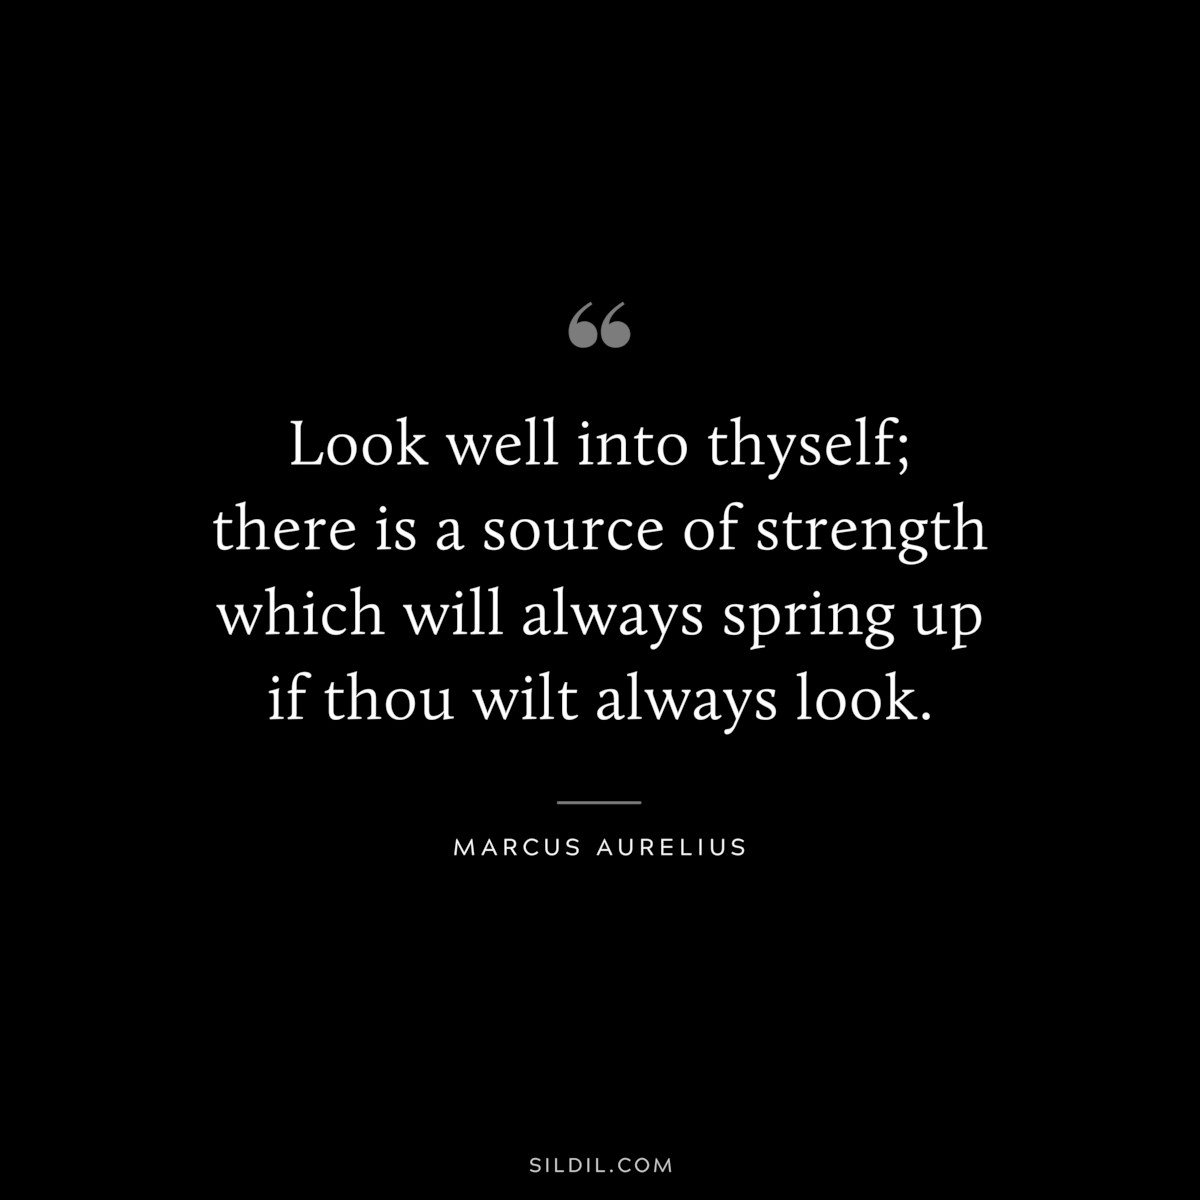 Look well into thyself; there is a source of strength which will always spring up if thou wilt always look. ― Marcus Aurelius